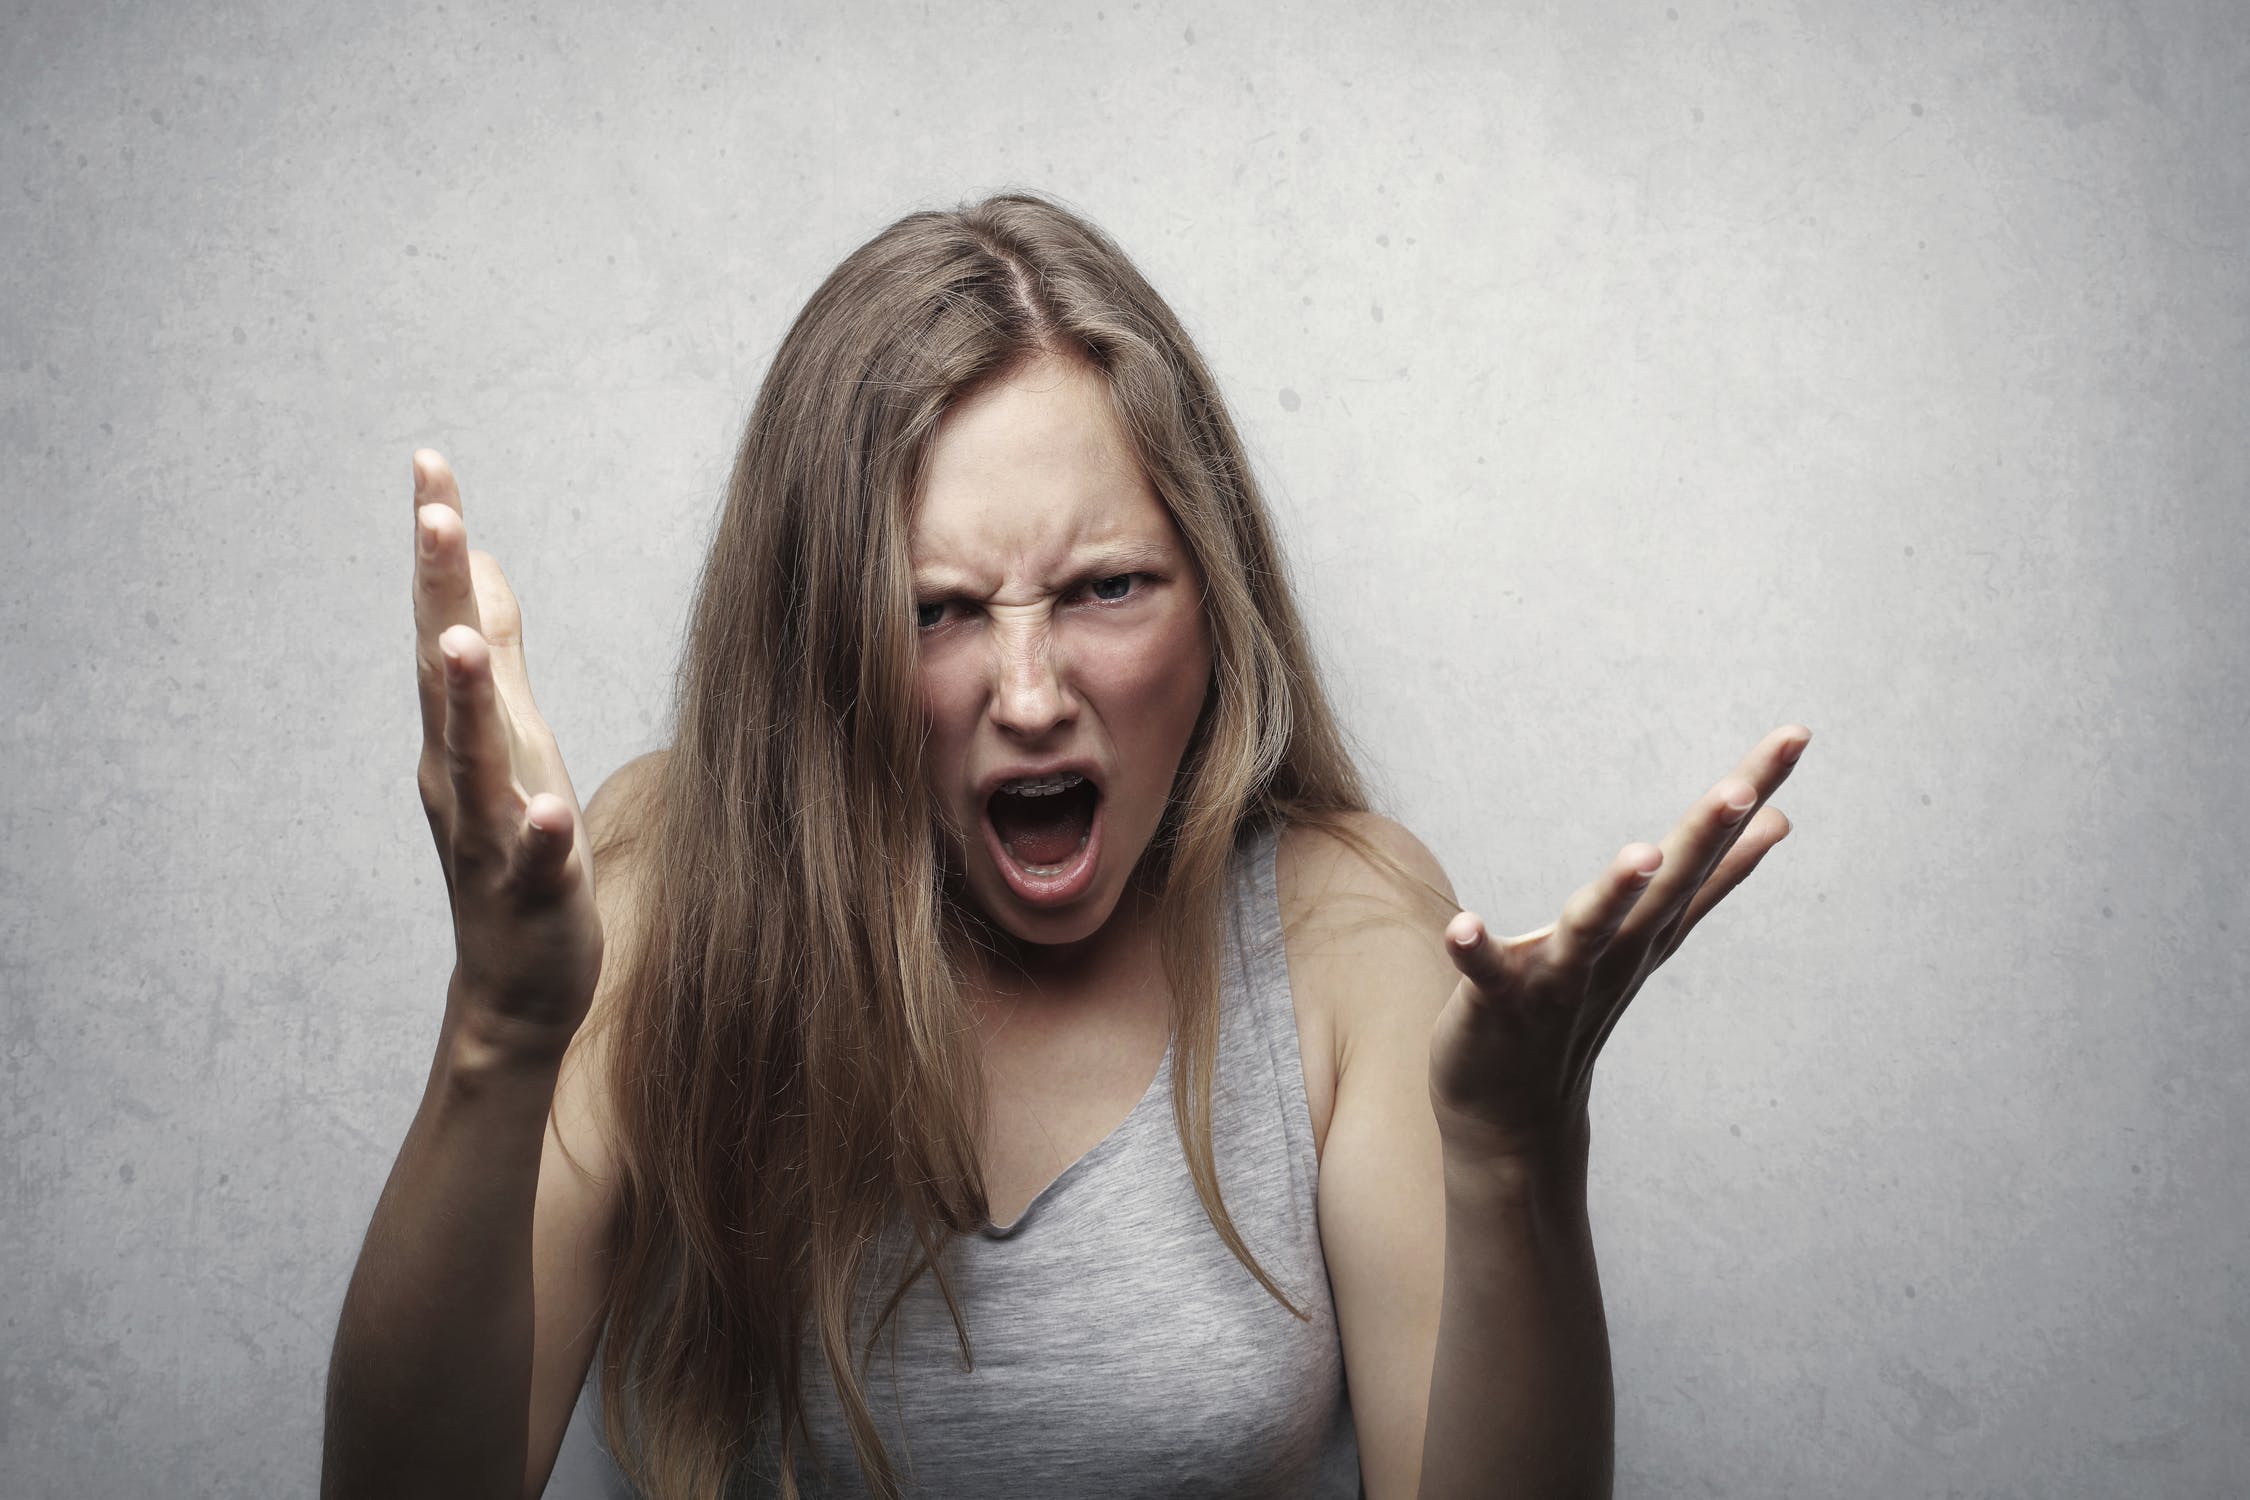 Angry Woman |  Source: Pexels